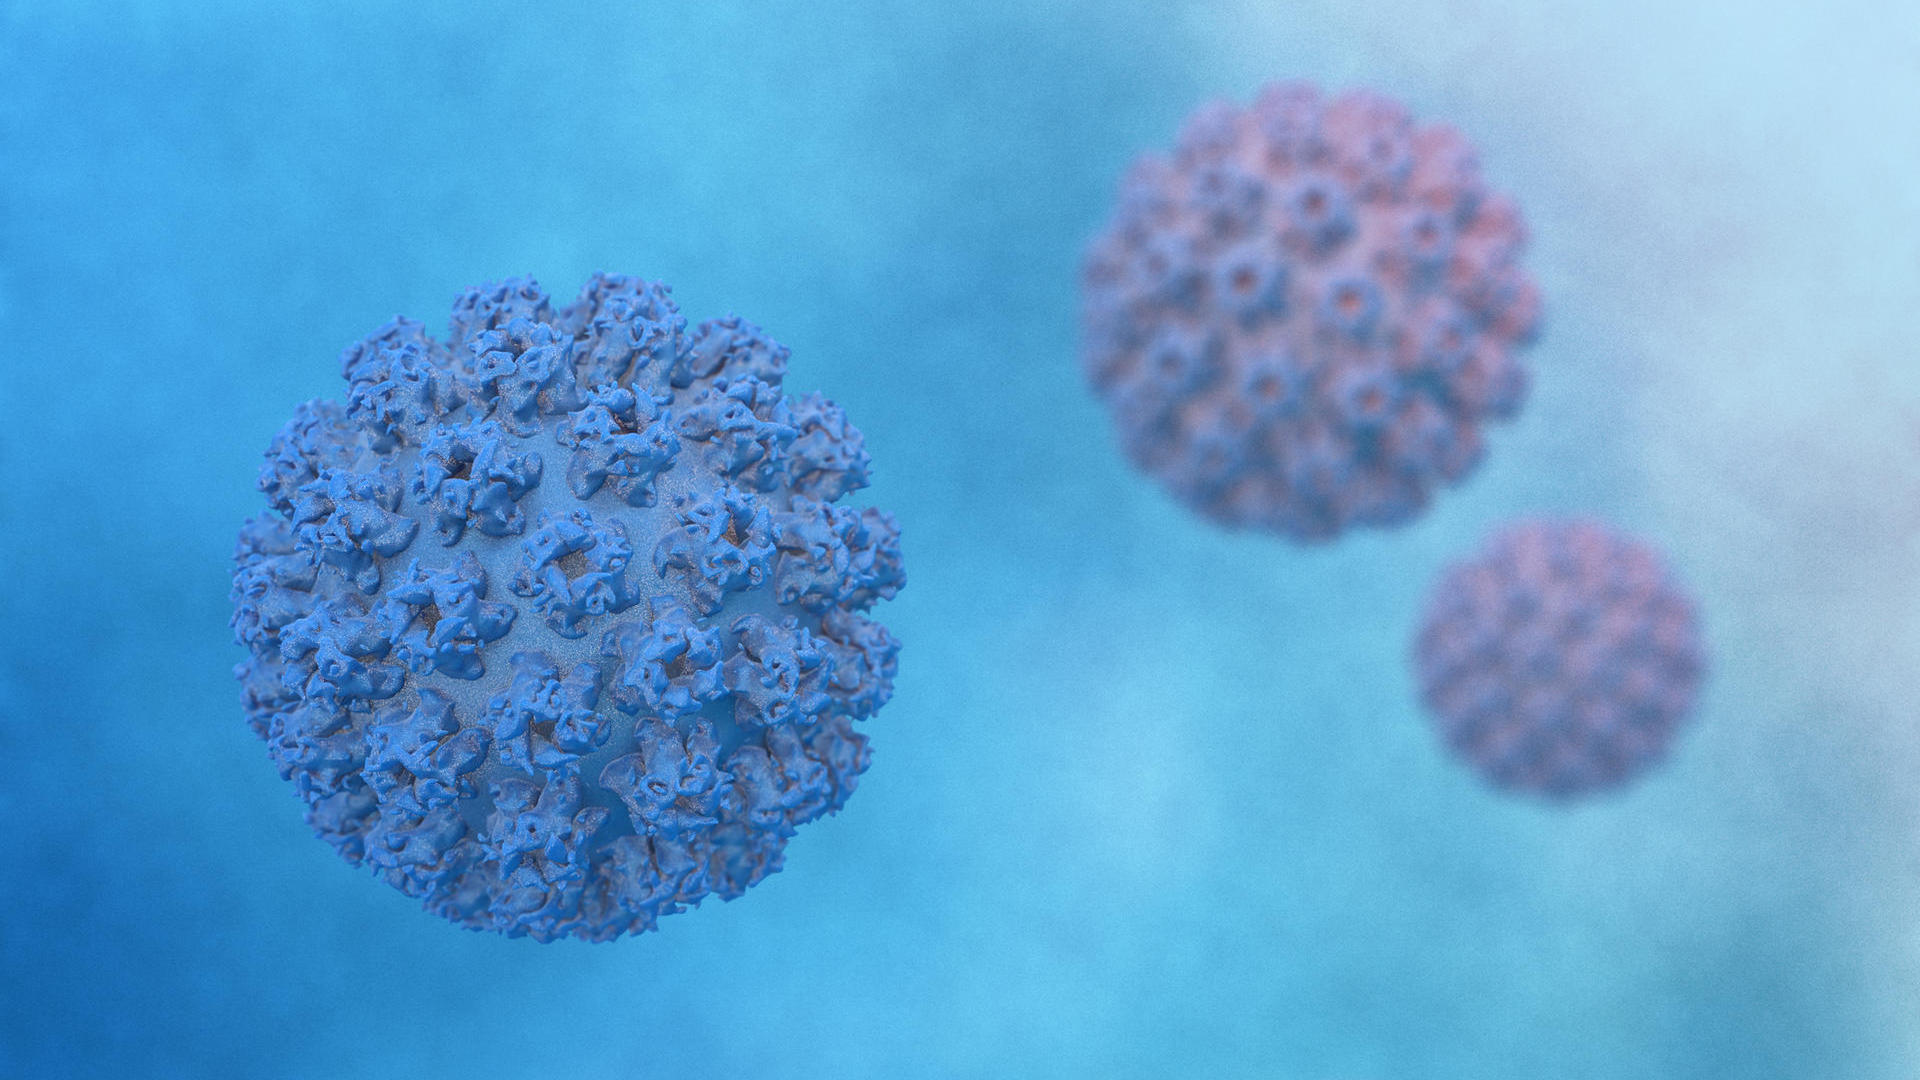 Prostate cancer - HPV can cause prostate cancer - new findings